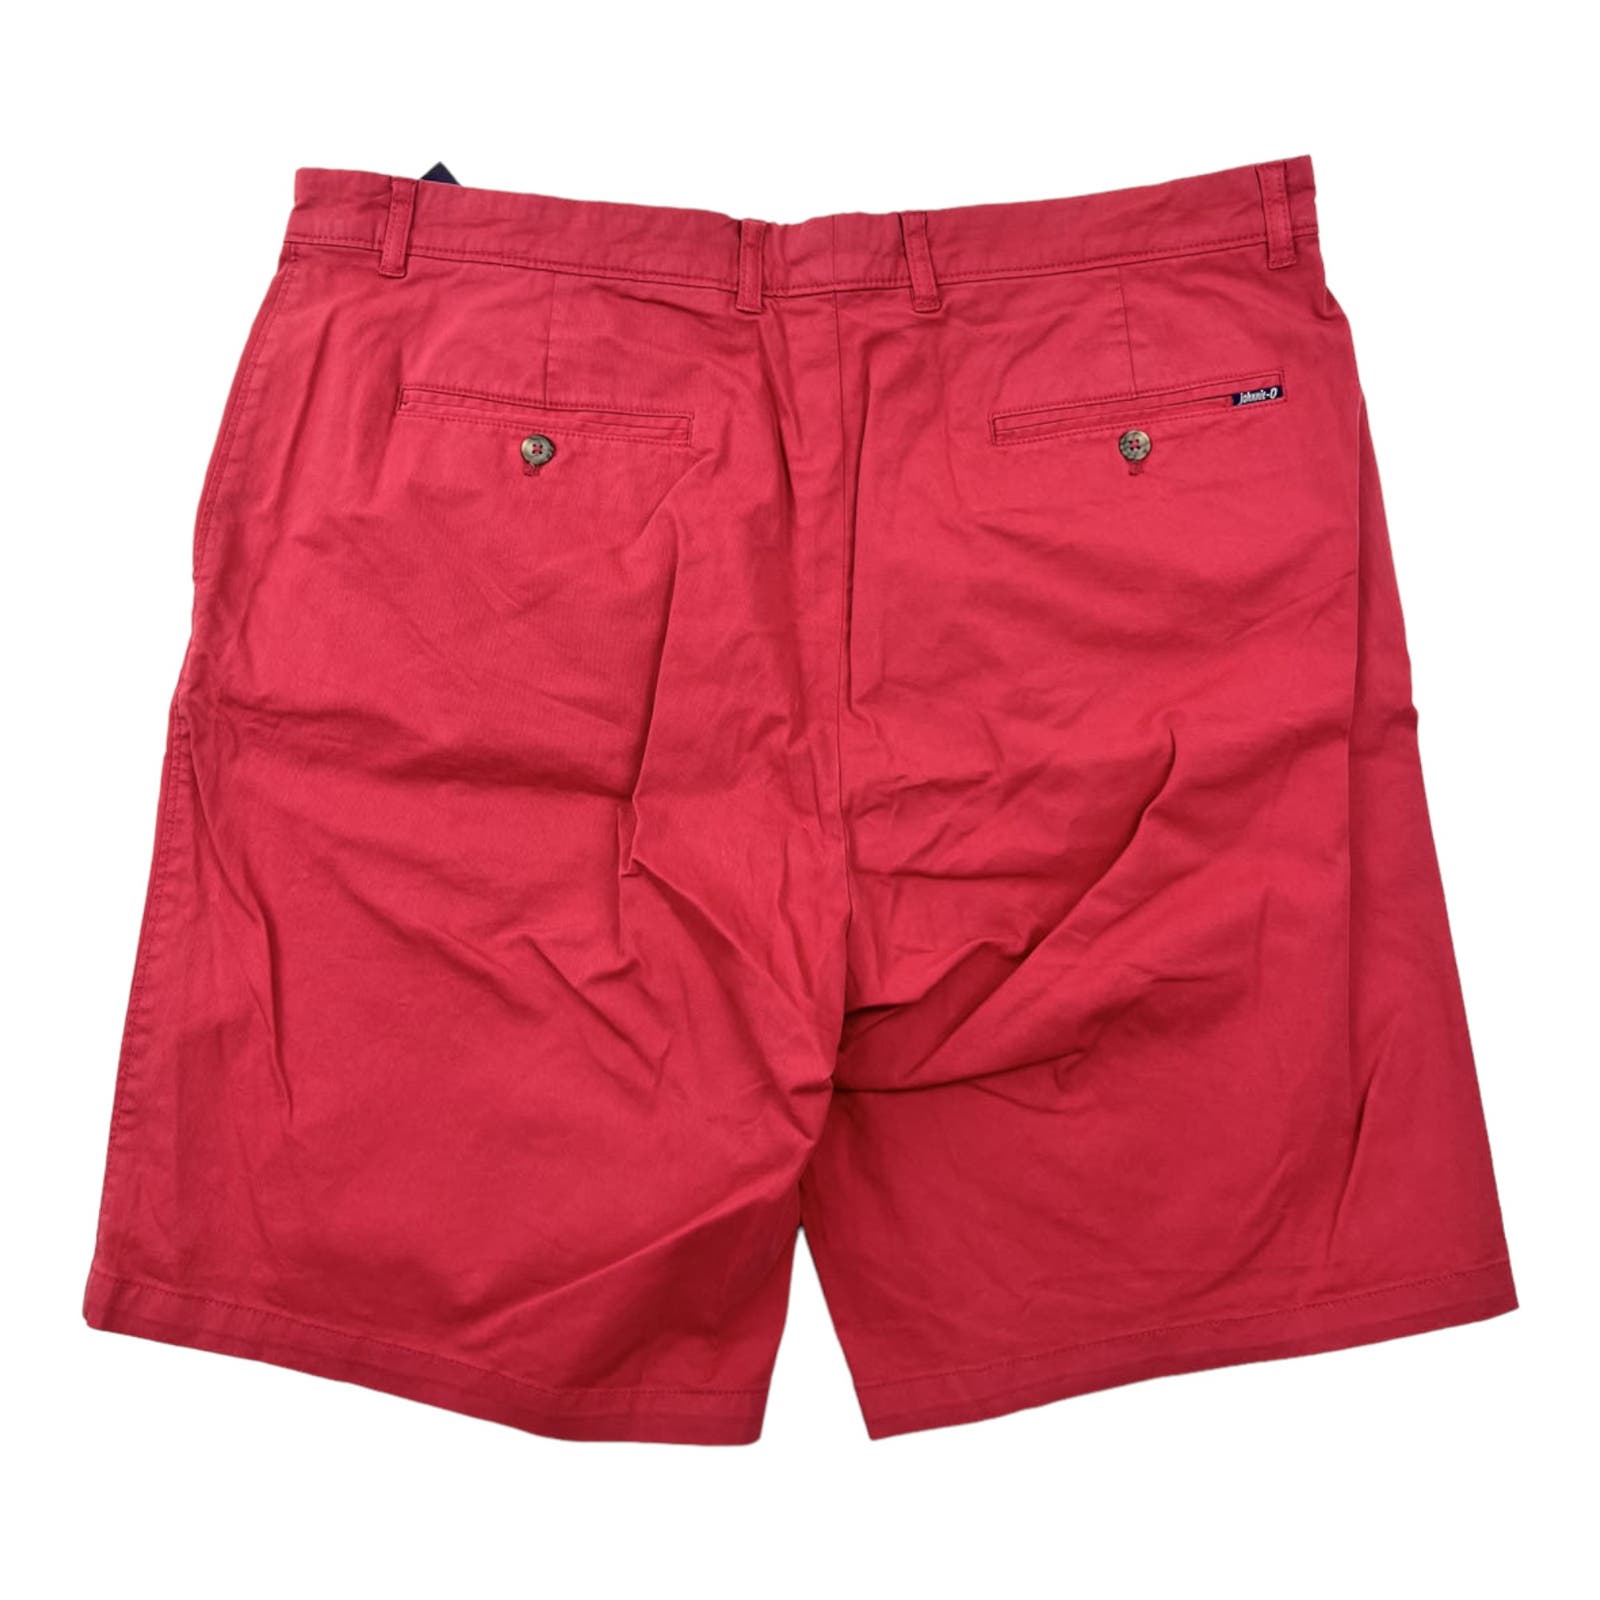 Johnnie-O Men Red Chinos Shorts US 40 Classic Fit Cotton